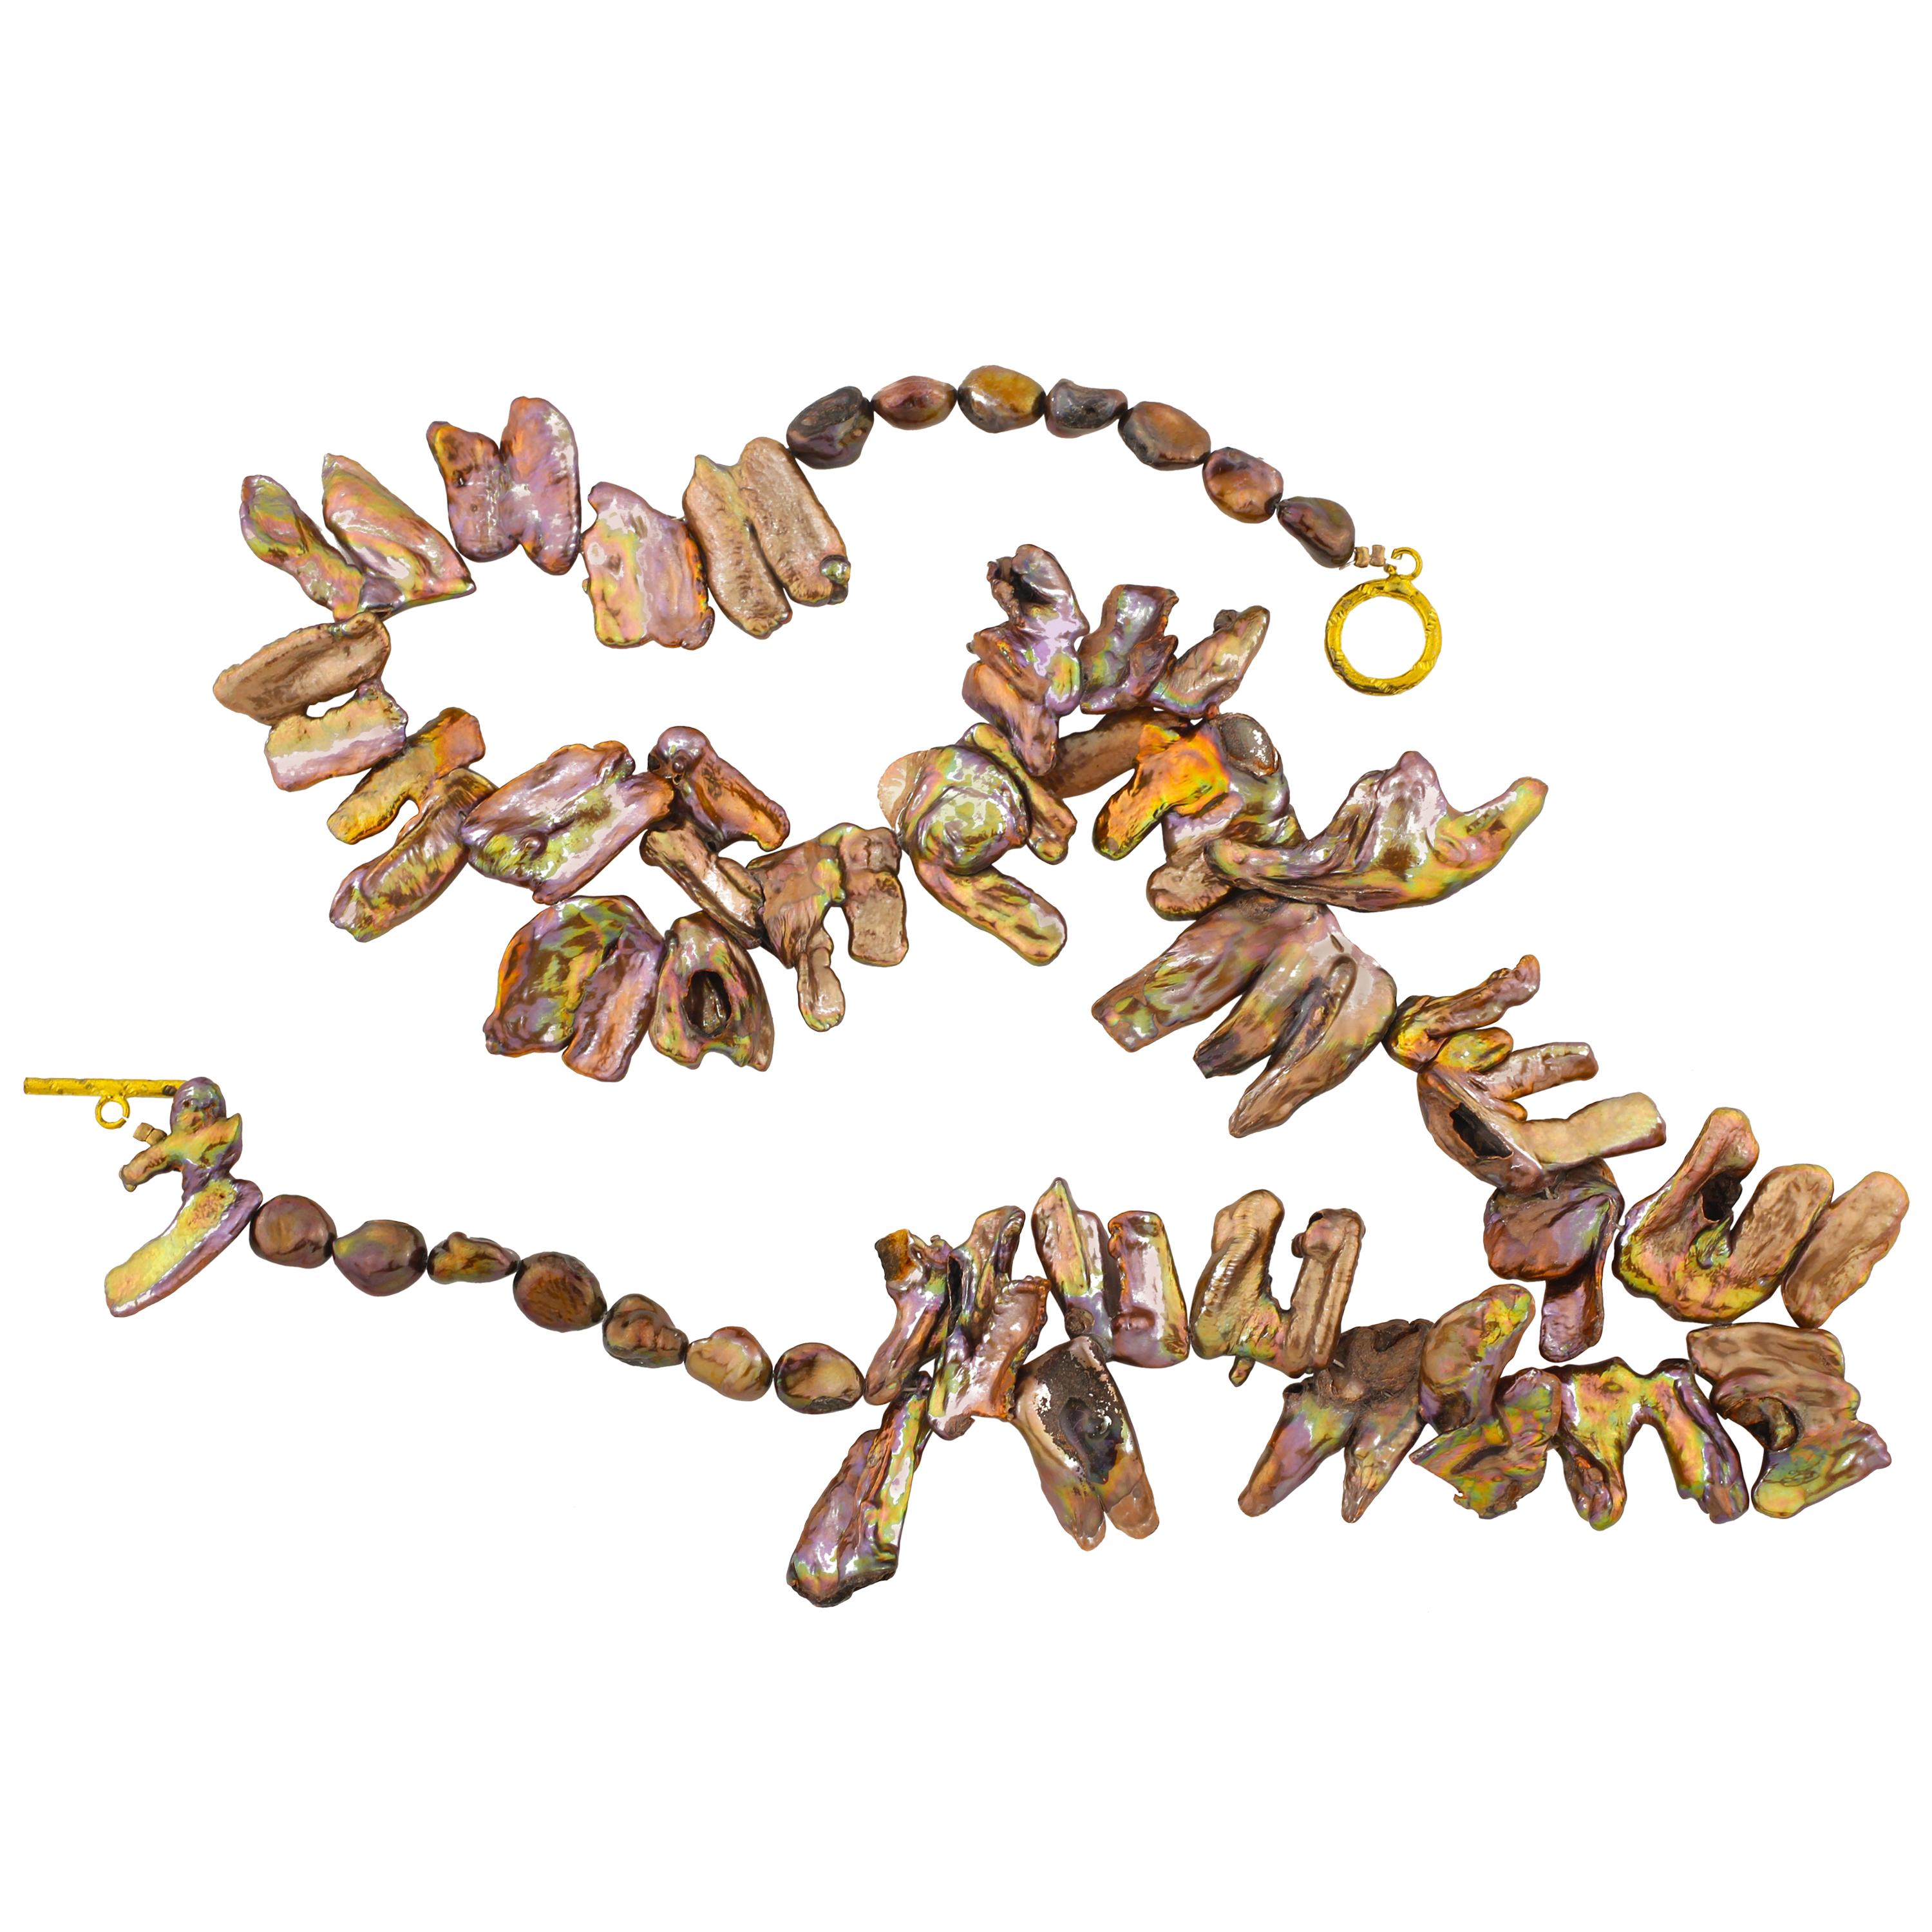 Brilliant color reflecting petals of copper pearls you can flip flop in two different directions on this fascinating handmade necklace that is 22 inches long.  The artistry in the design is intrinsic in the Pearls.  The clasp is a goldish tone.  